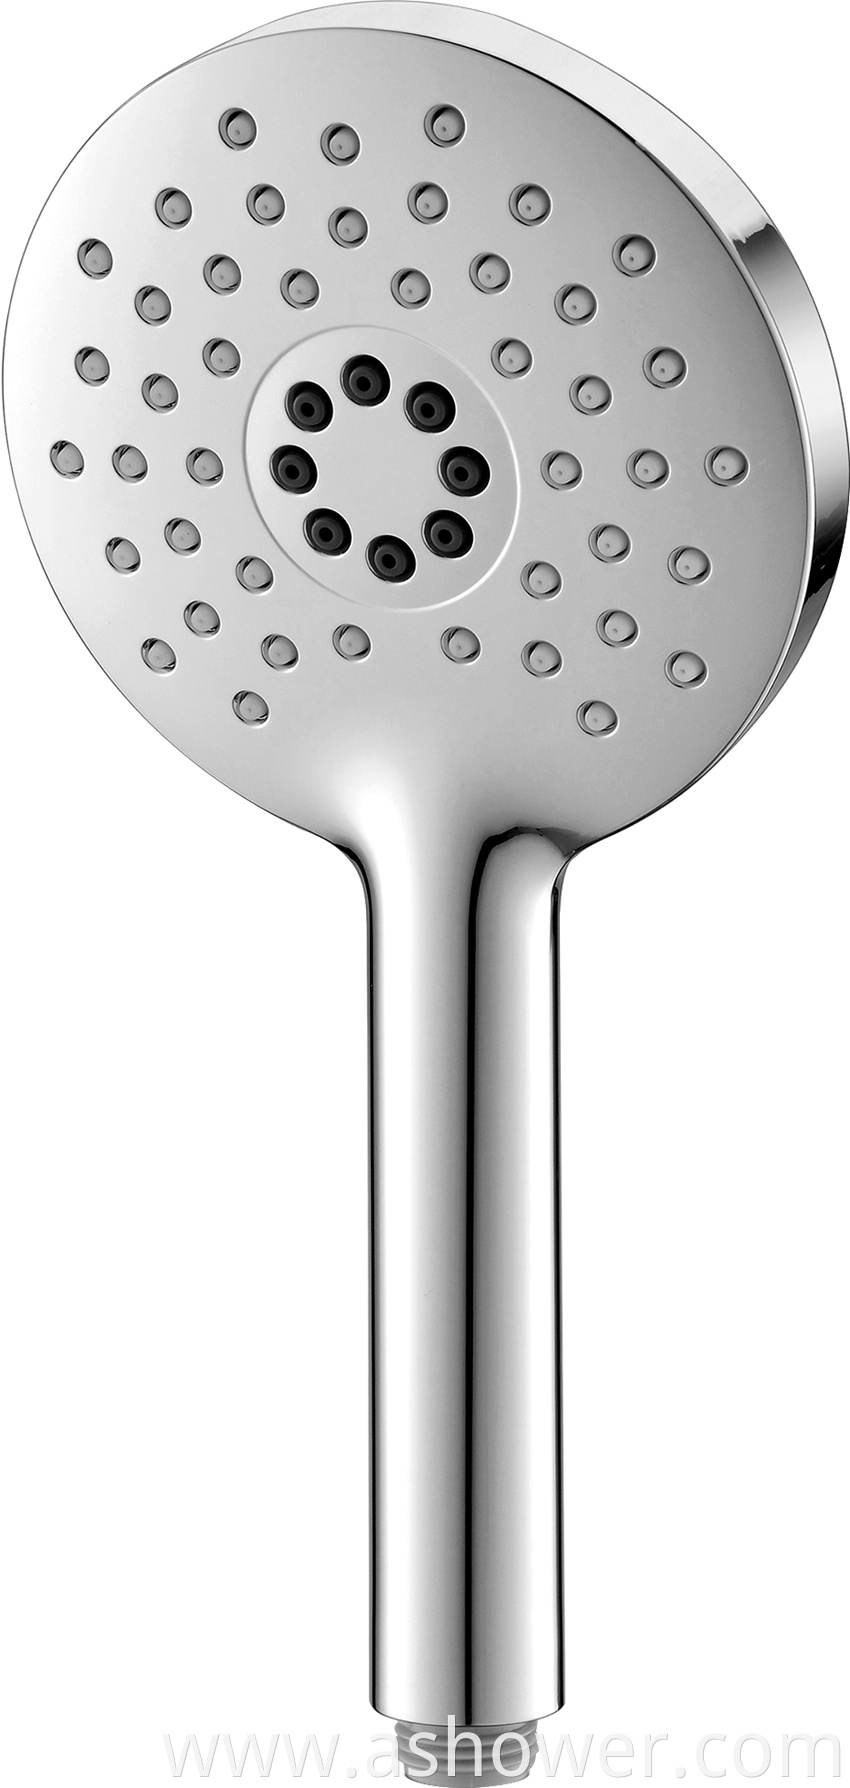 120mm Triple Function Round Back Press Hand Shower